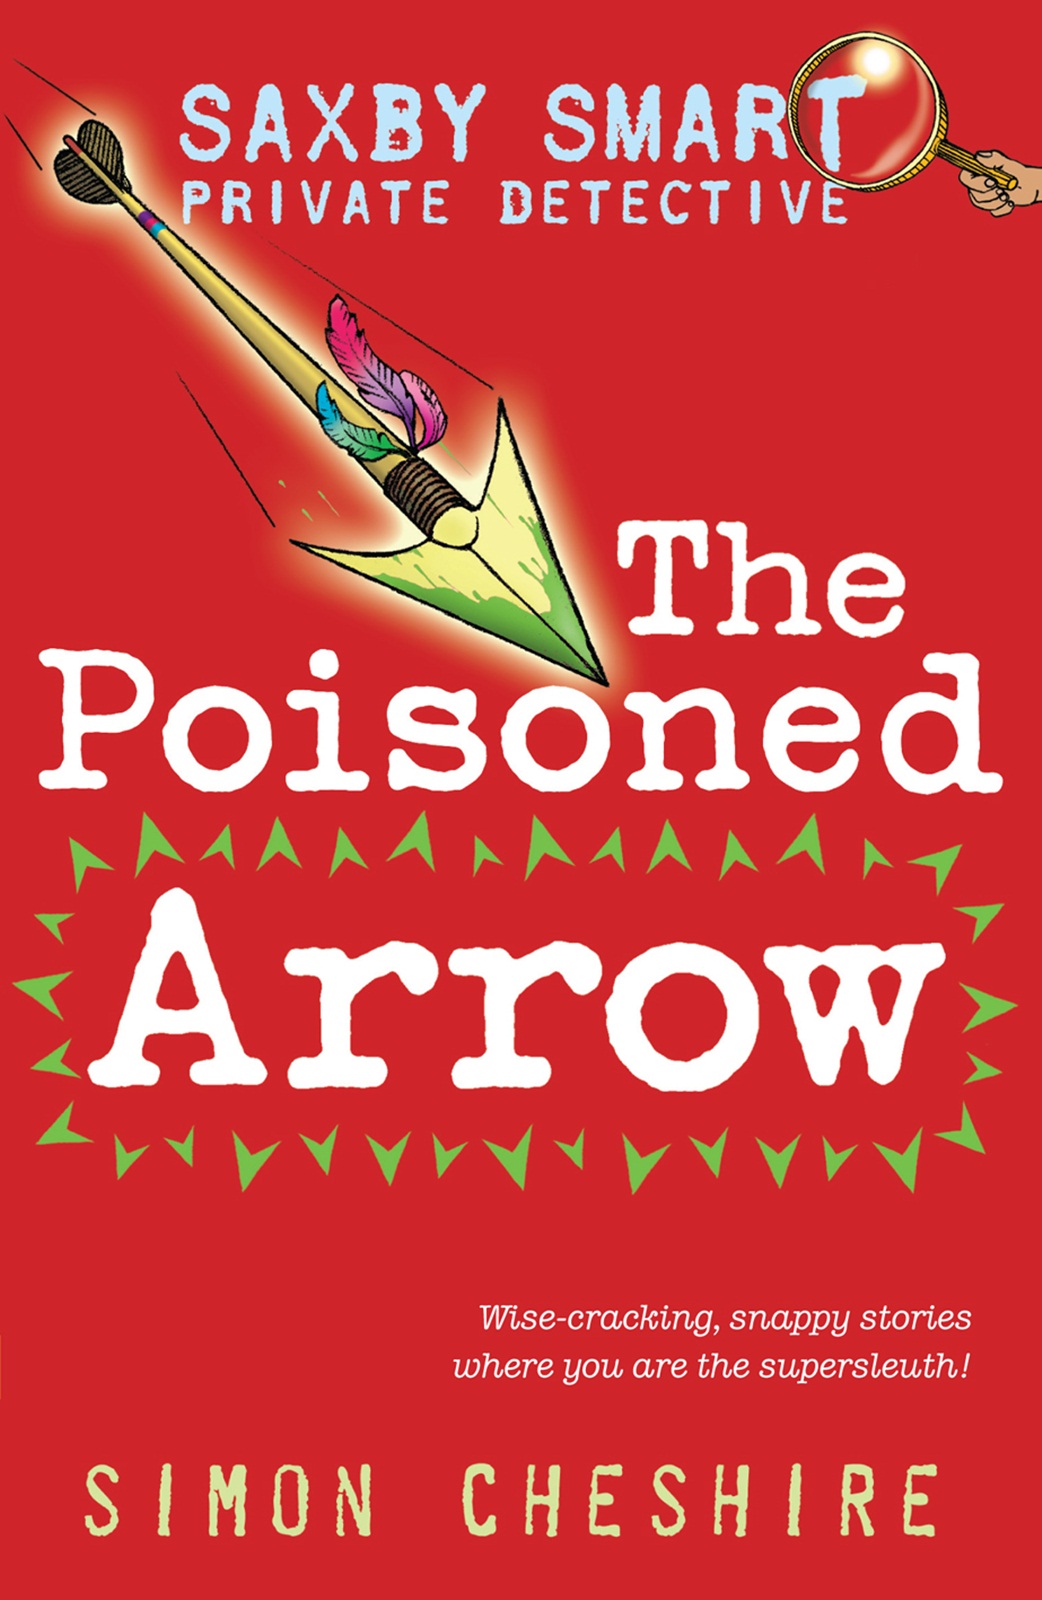 The Poisoned Arrow by Simon Cheshire